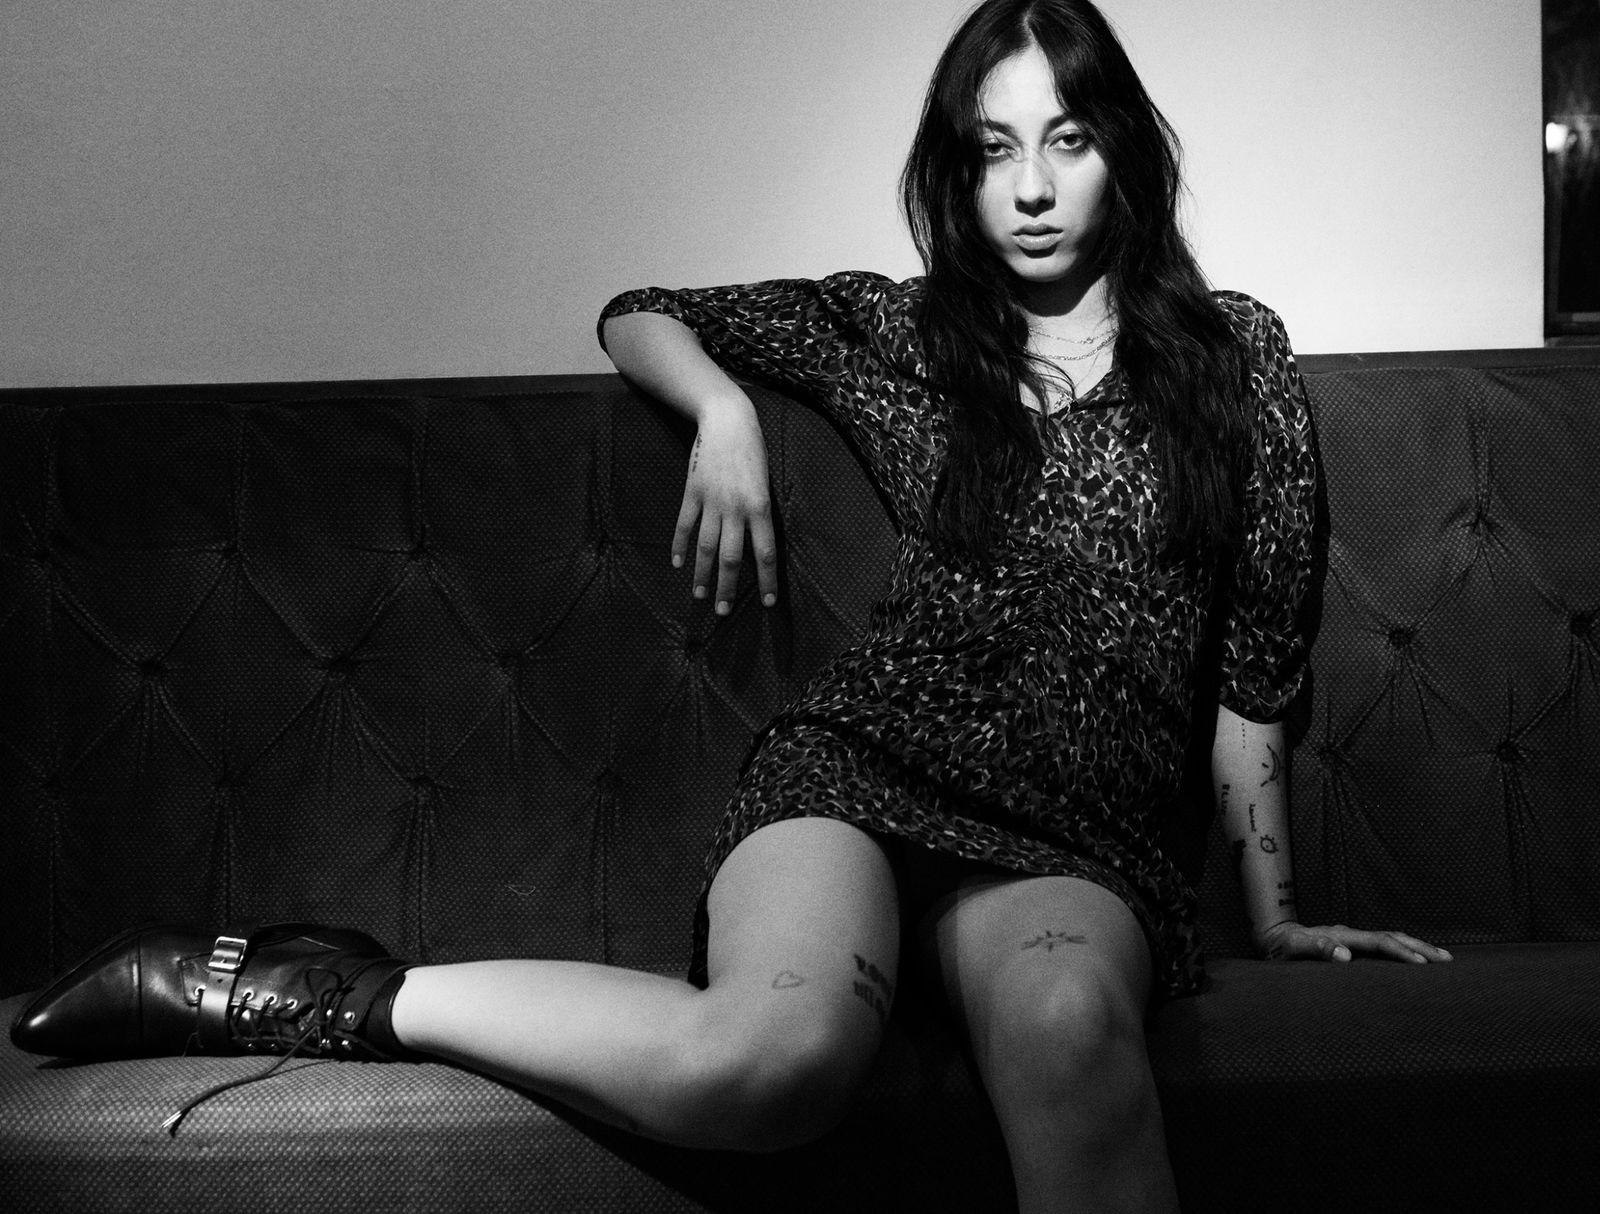 Black and white image of a woman sitting on a couch wearing a short leopard printed dress with black leather boots.